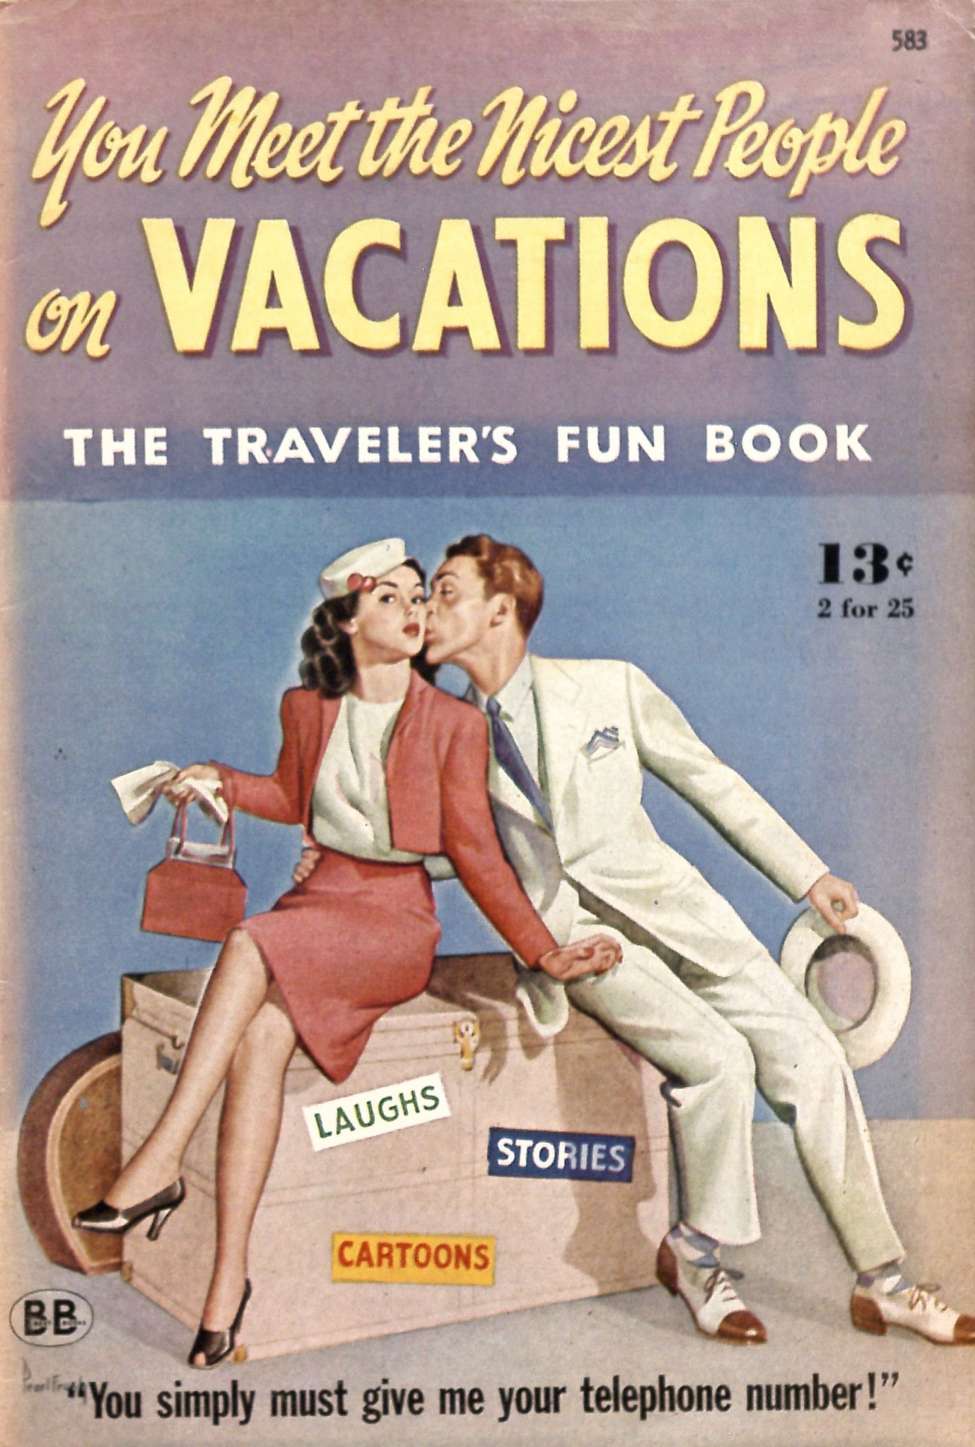 Book Cover For Best Books 583 - You Meet the Nicest People on Vacations